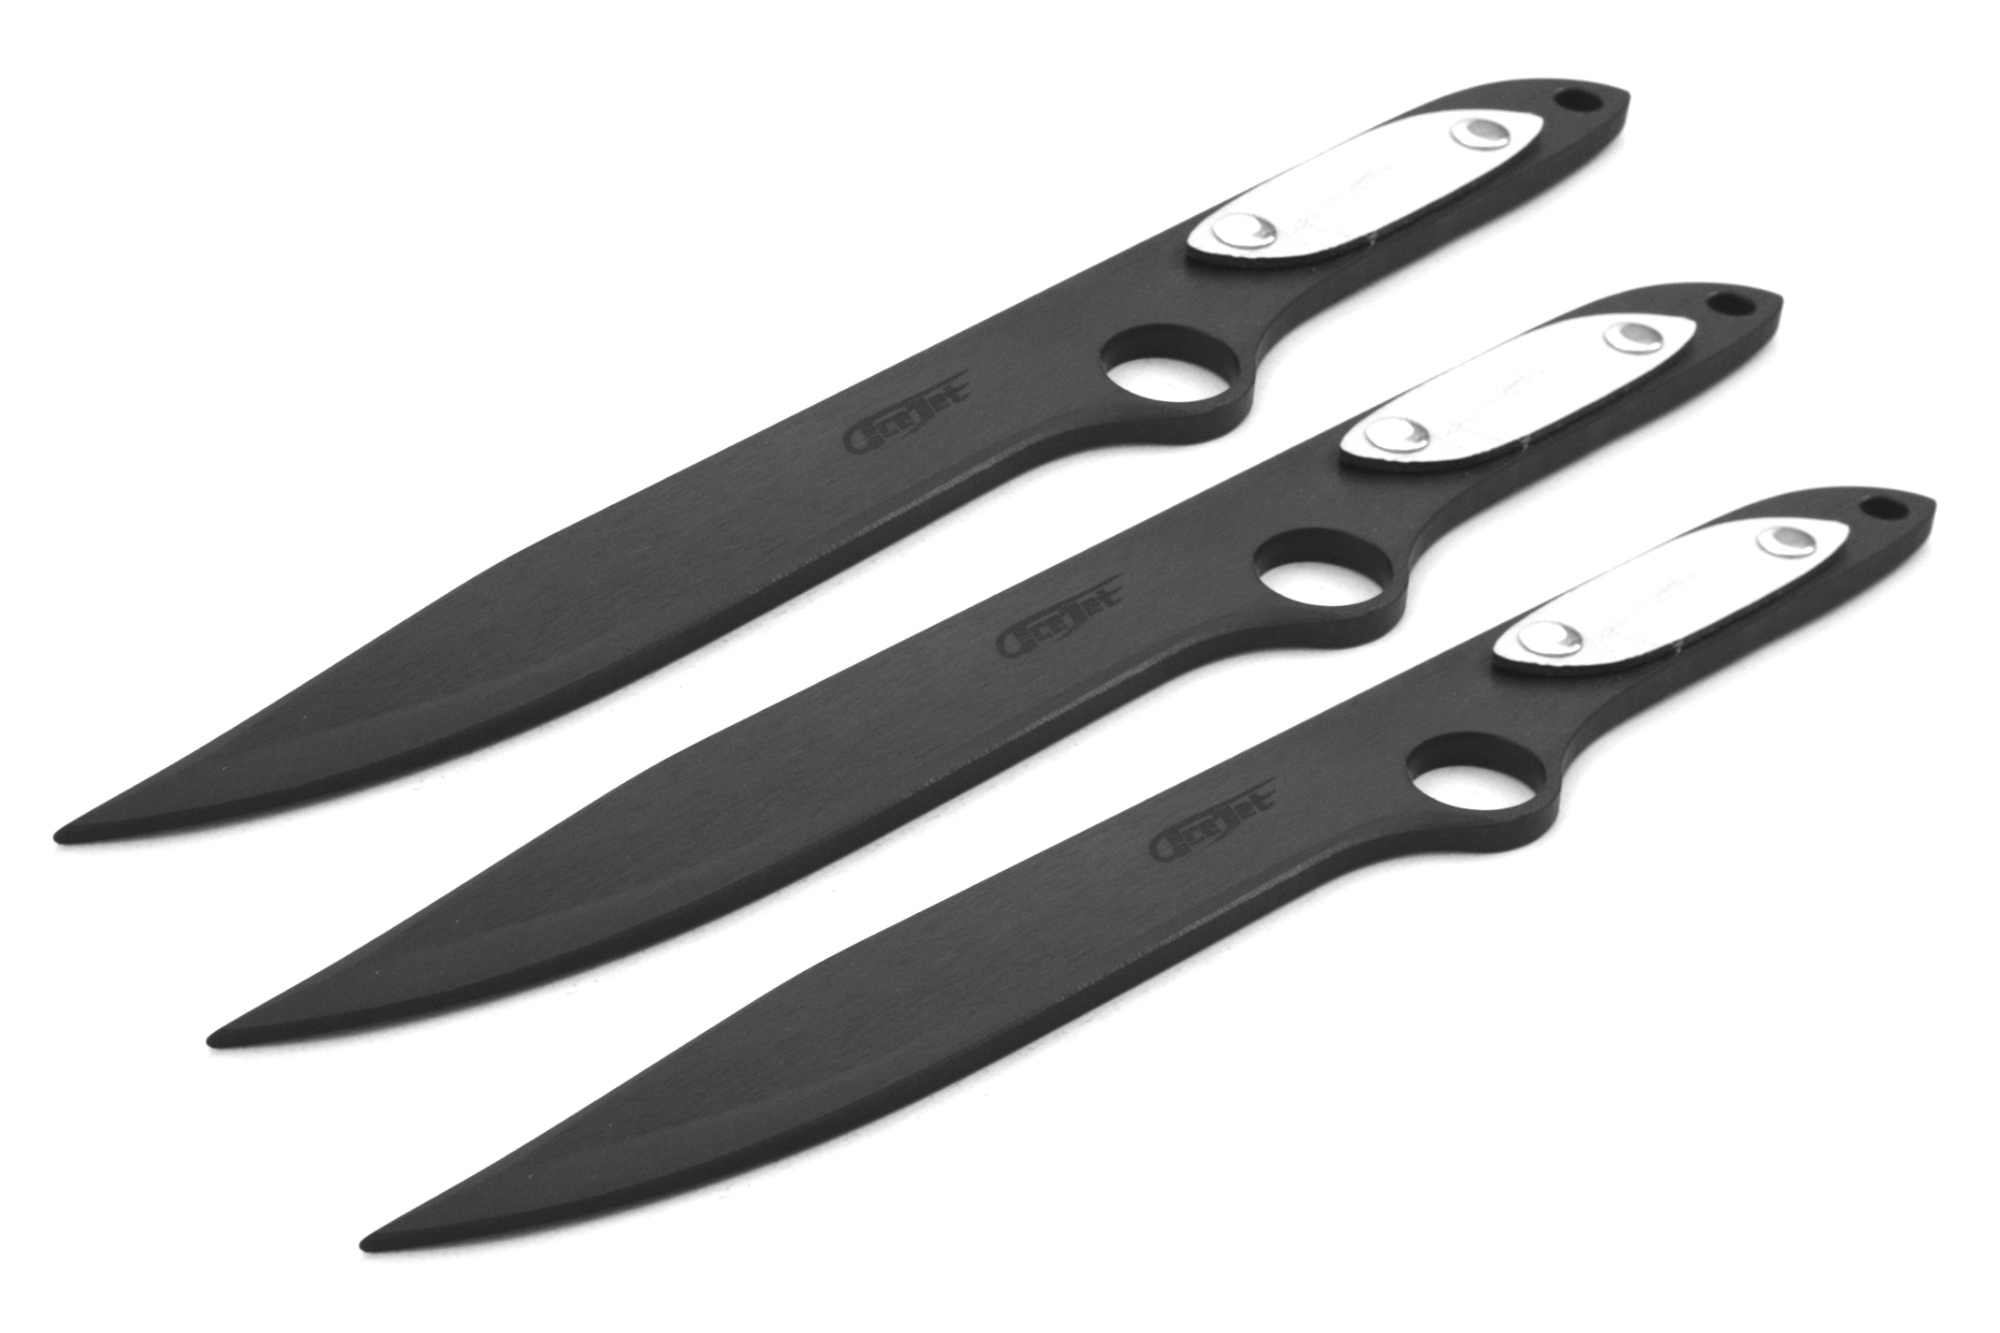 ACEJET SPINNER BOWIE Shadow Hunter 13'' white grip - Throwing knife - set of 3